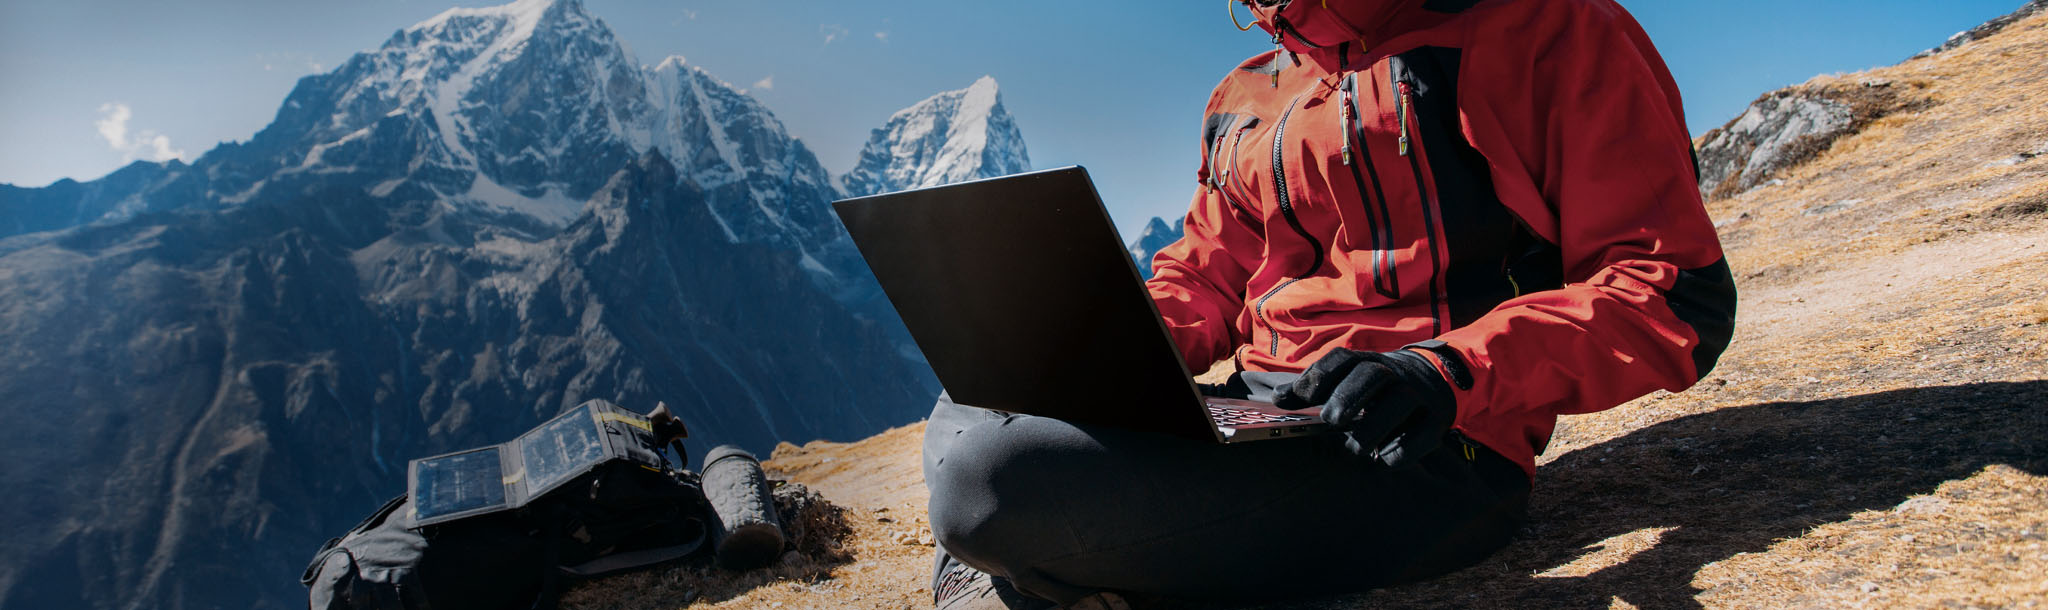 A hiker sitting on a mountain slope using a laptop.]